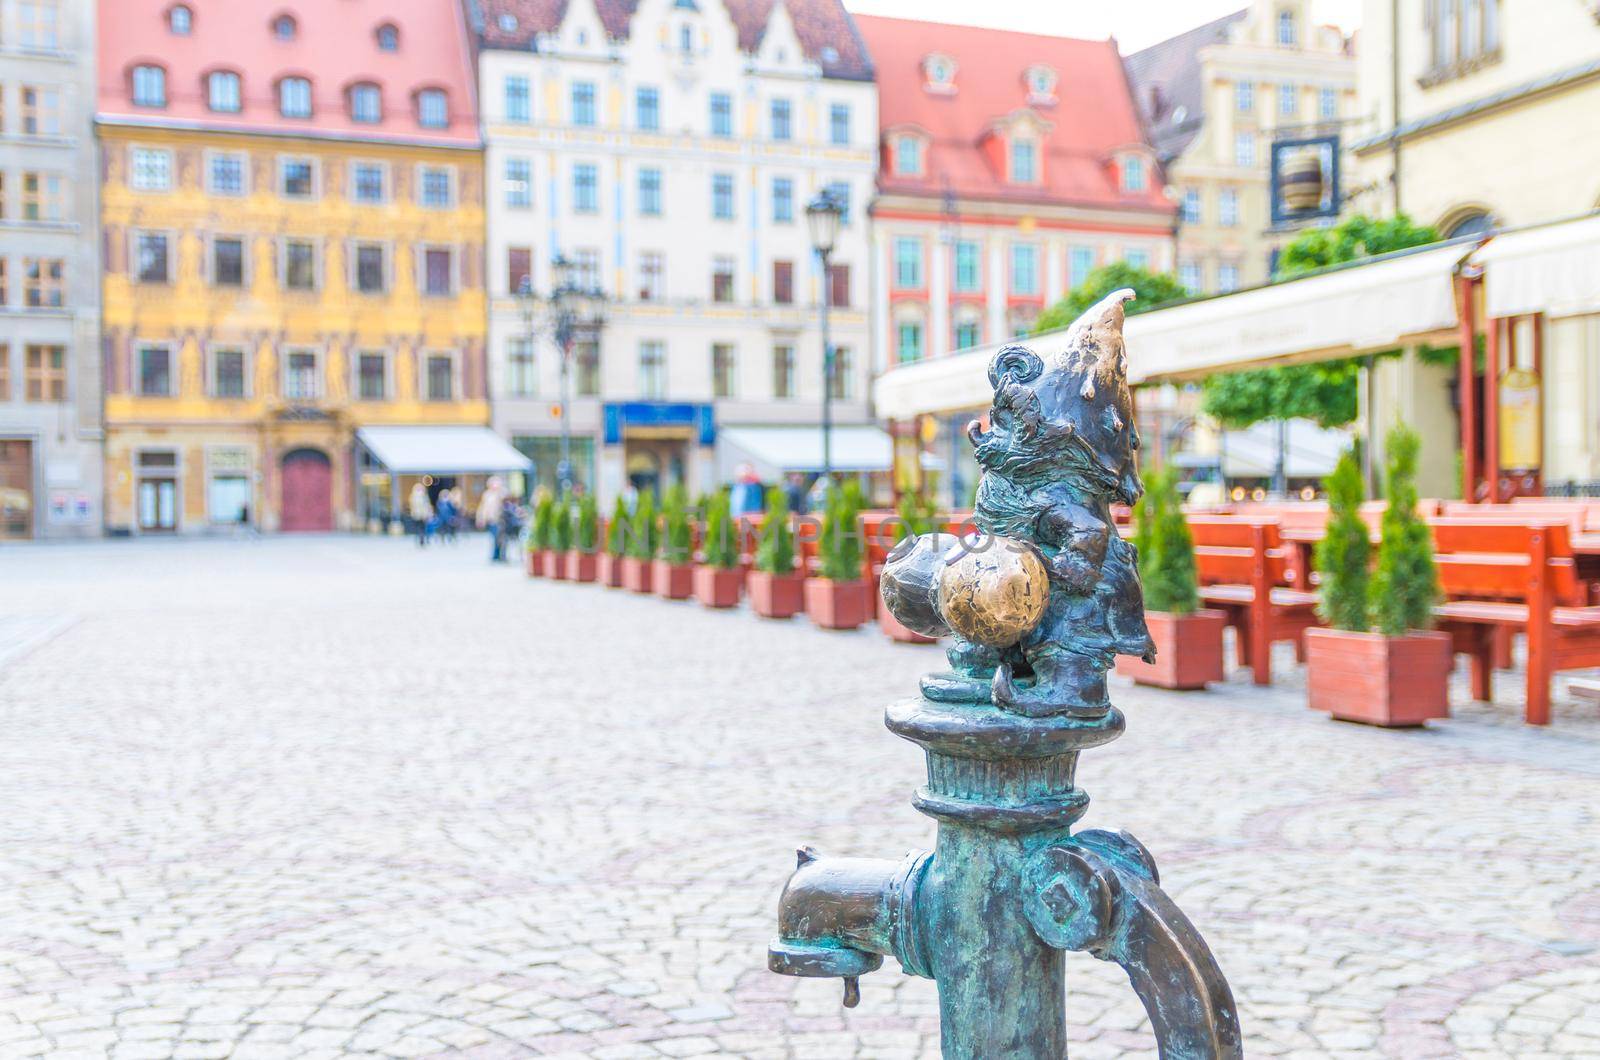 Wroclaw, Poland, May 7, 2019: Dwarf is sitting on street water tap on Rynek Market Square, famous bronze miniature gnome with hat sculpture is a symbol of Wroclaw in old historical city centre